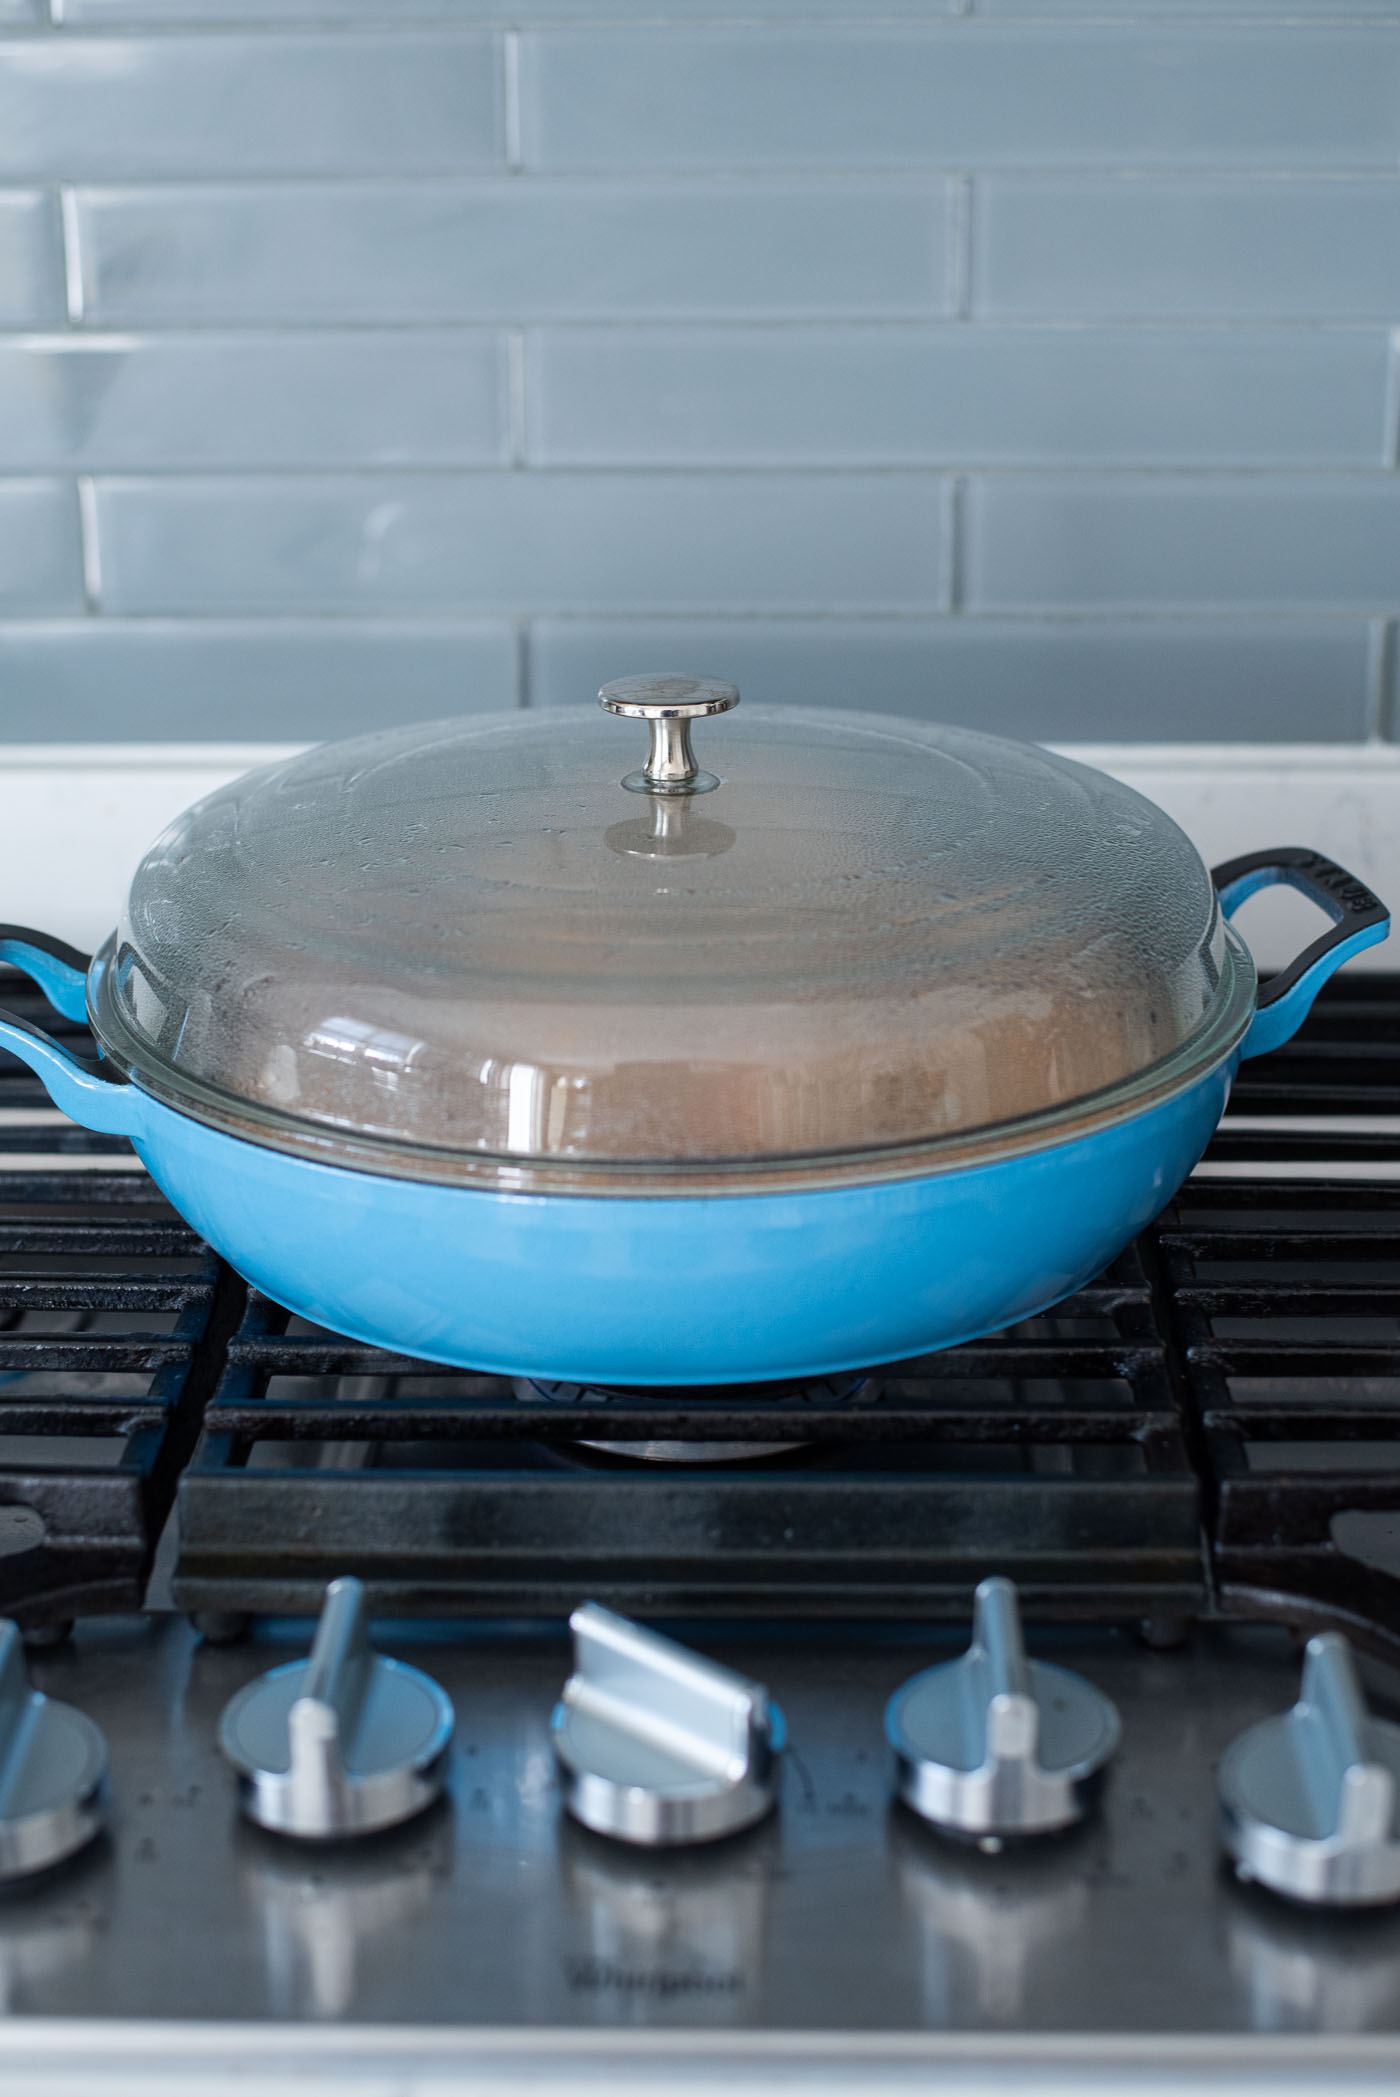 A blue pan is covered with a dome shaped lid and placed on the stove